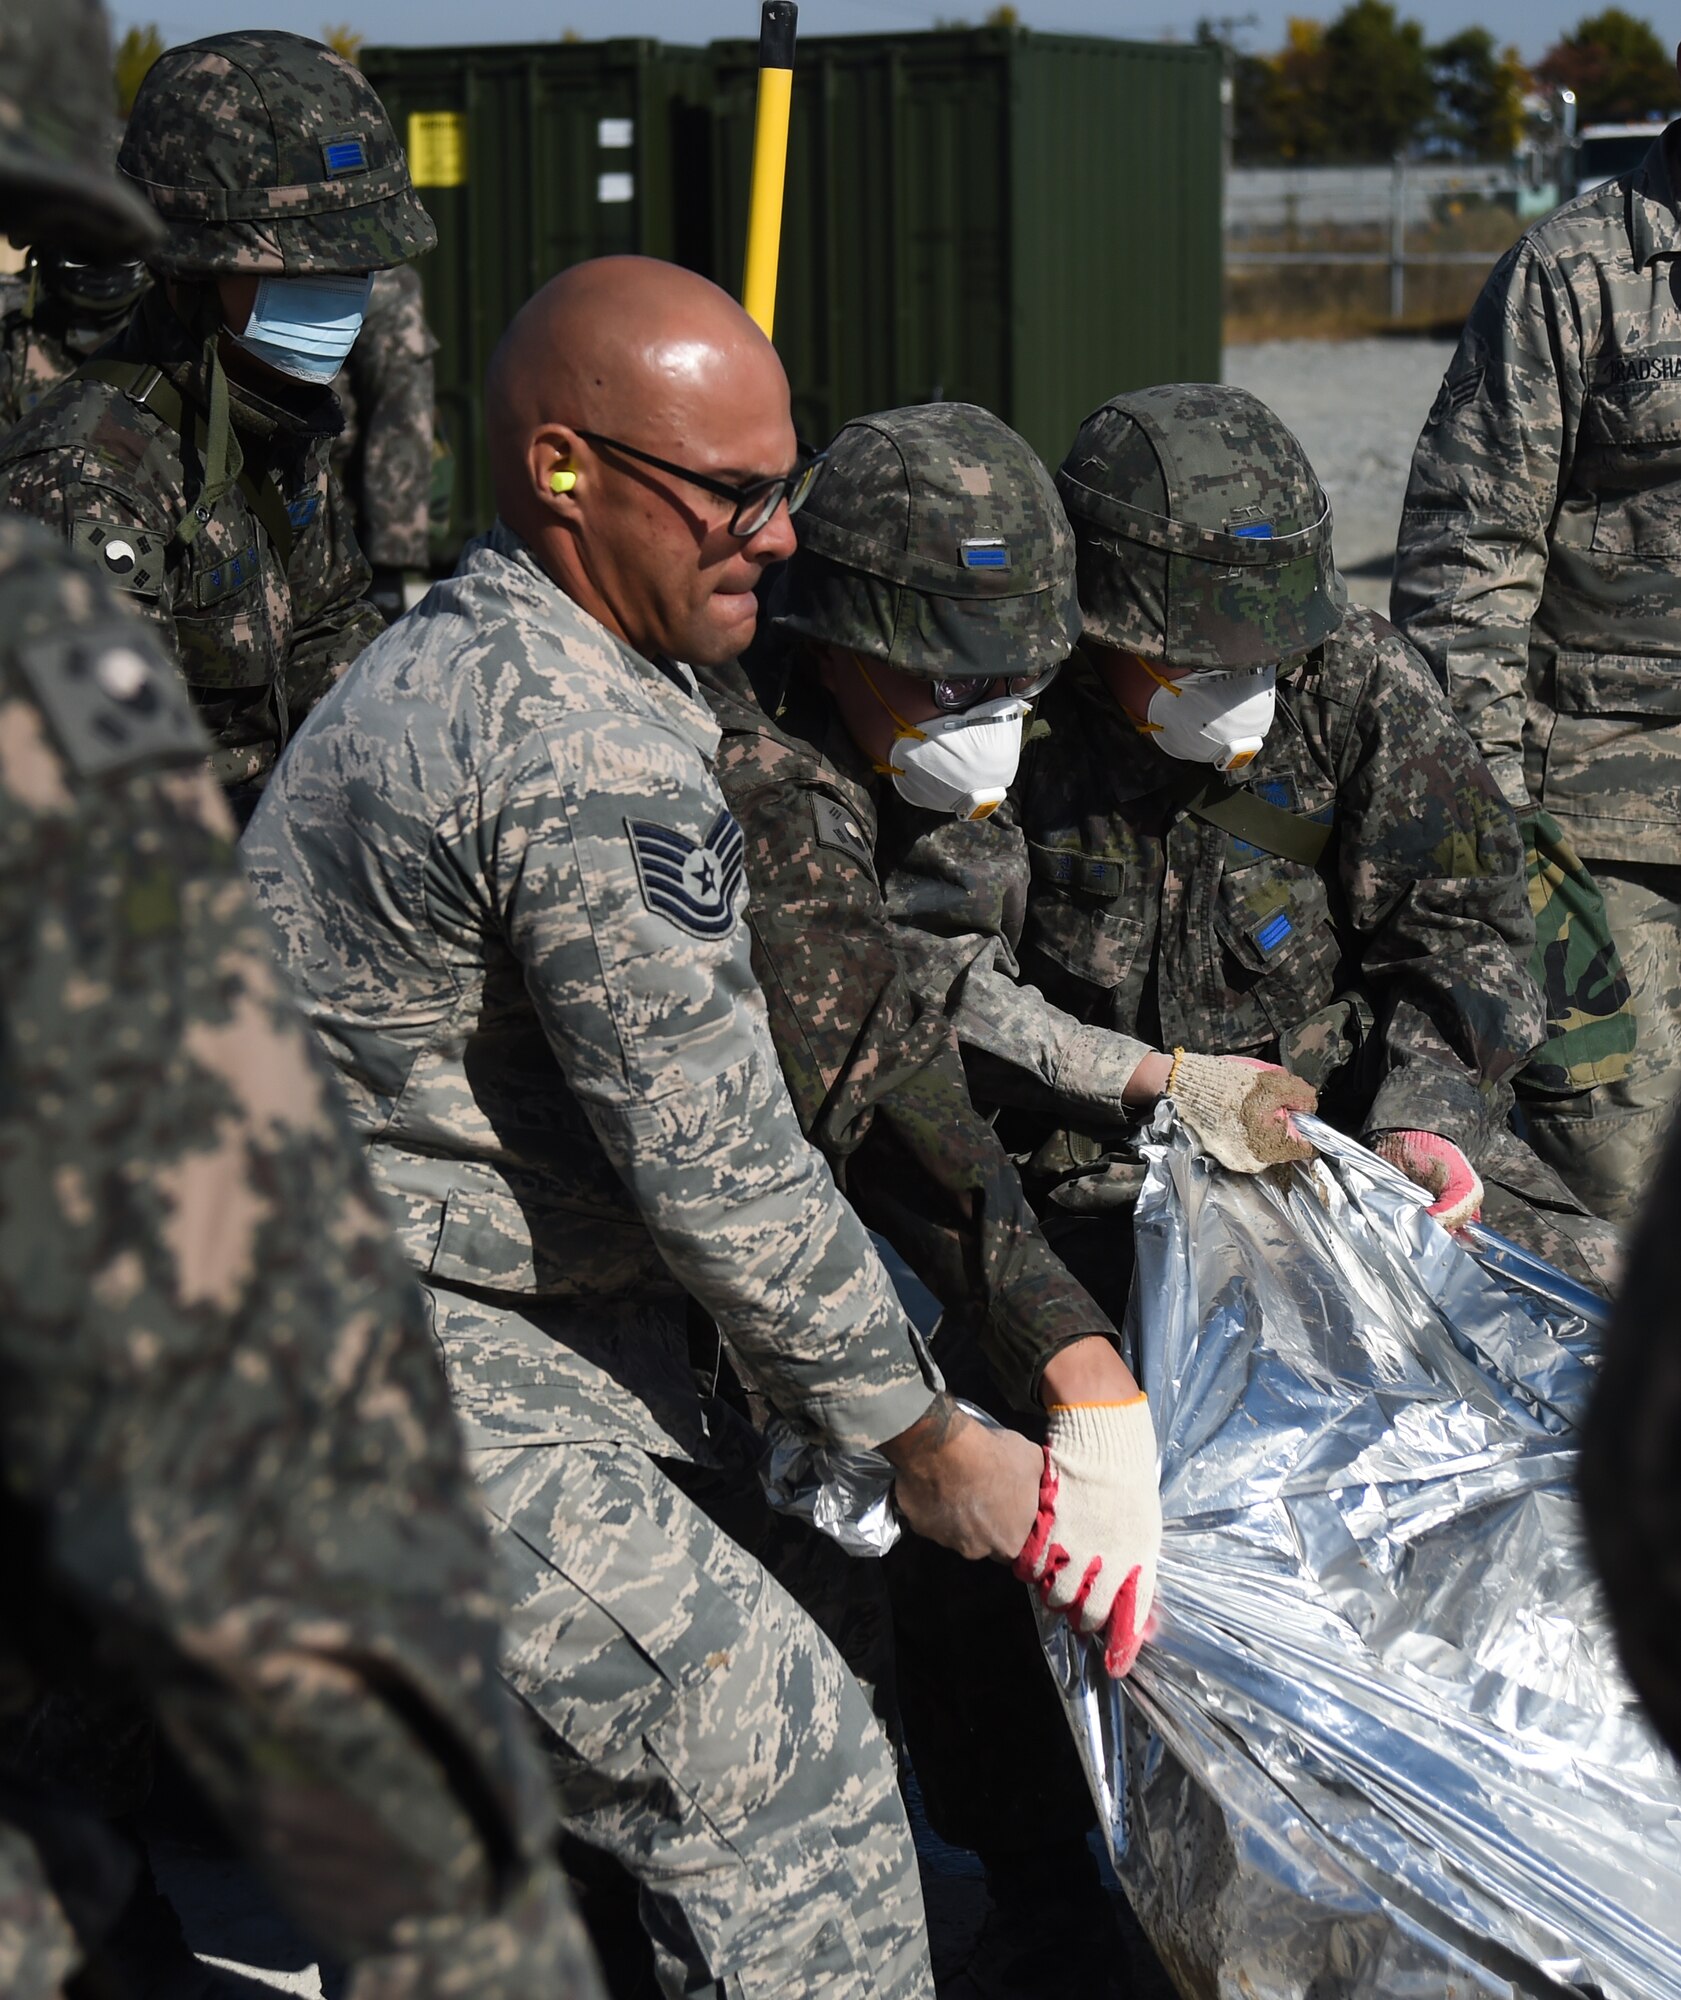 U.S. Air Force and Republic of Korea Airmen empty concrete into a crater during a Rapid Airfield Damage Repair bilateral training exercise at Gwangju Air Base, R.O.K., Nov. 9, 2017. U.S. and R.O.K. Airmen trained together for a week to learn the new RADR process, preparing them for response to wartime contingencies, enhancing interoperability and building partnership capacity in the Indo-Asia Pacific region. (U.S. Air Force photo by Senior Airman Curt Beach)